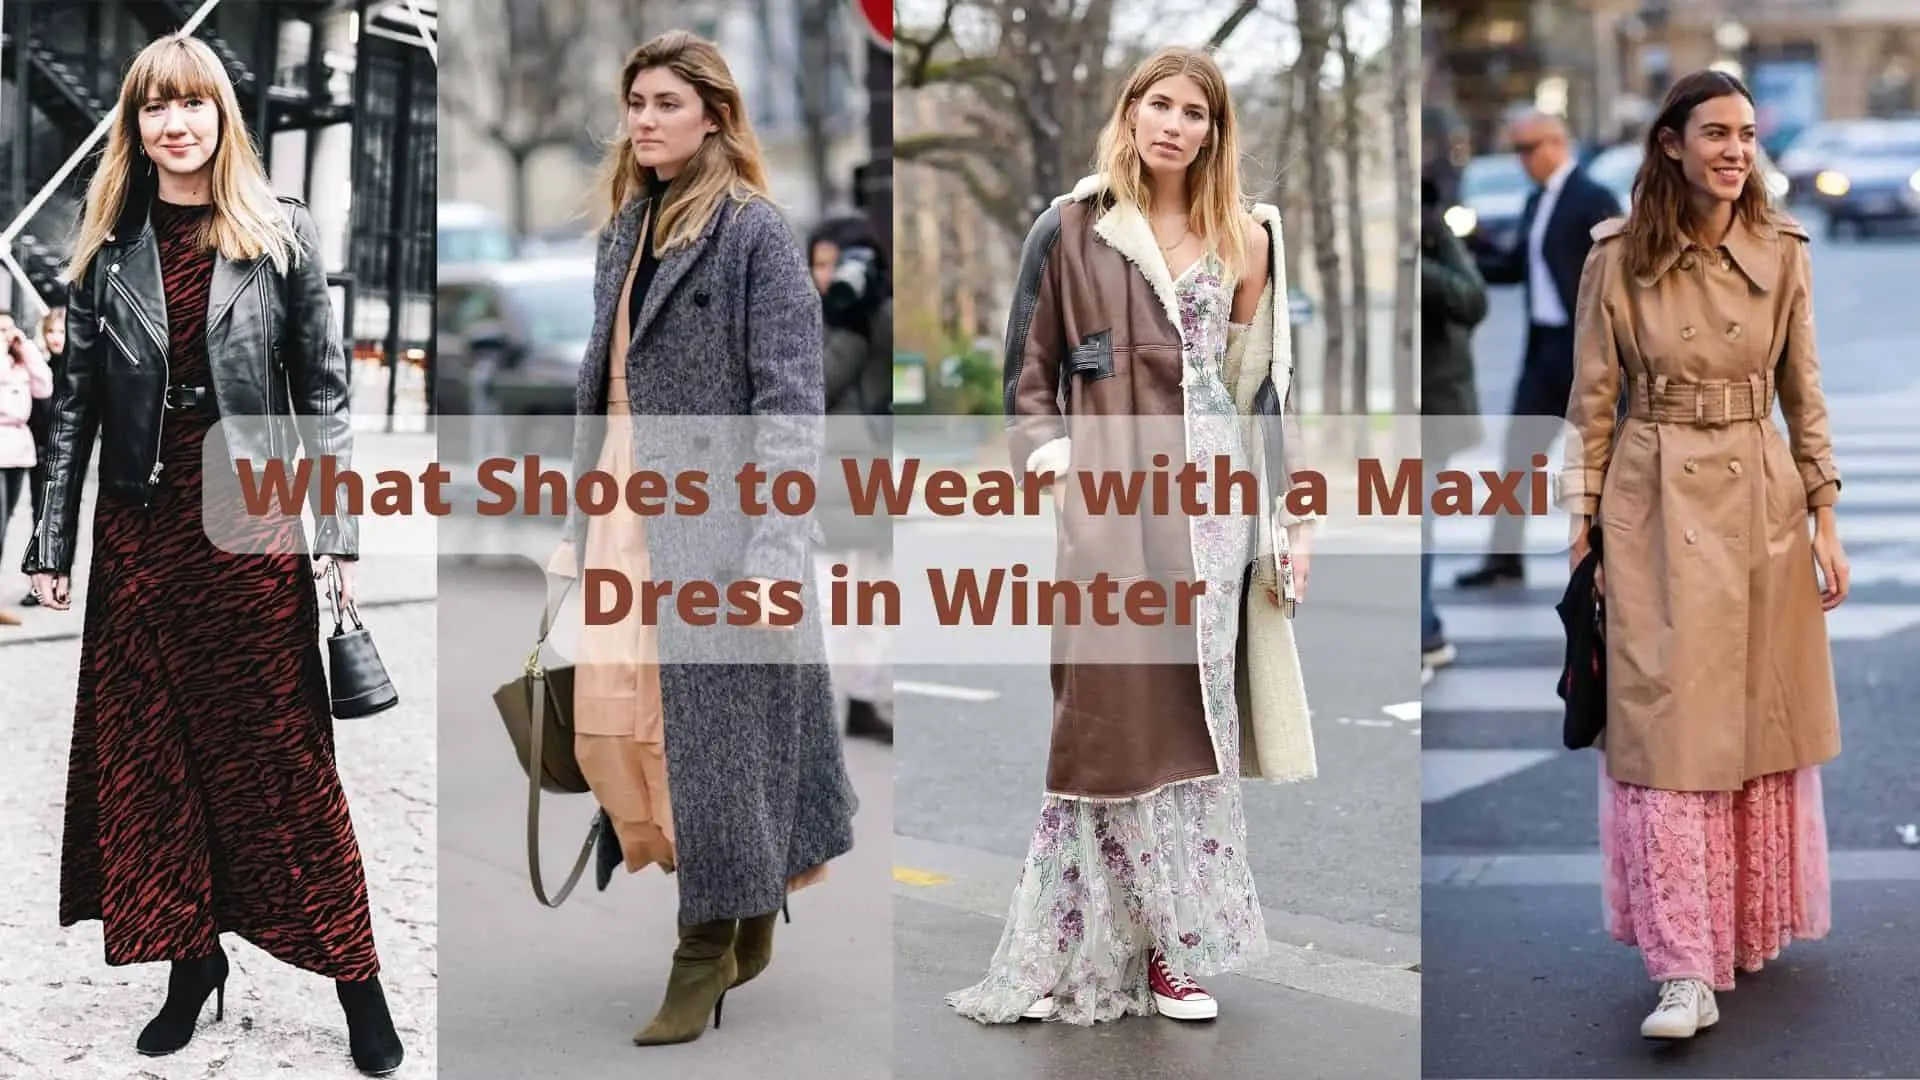 What Shoes to Wear with a Maxi Dress in Winter